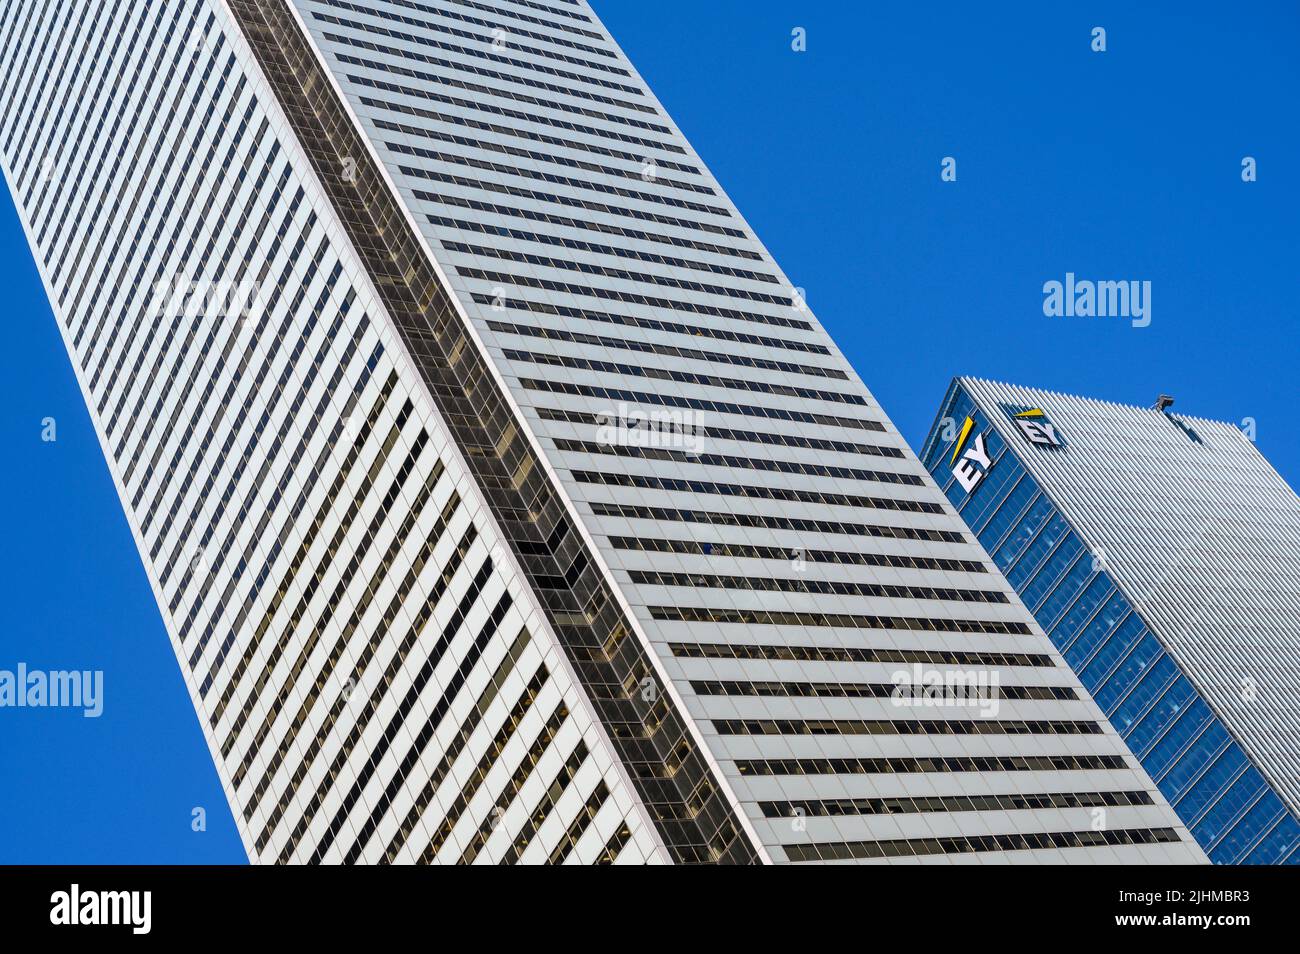 Bank of Montreal (BMO) building towering next to Ernst & Young (EY) office building seen from Bay Street, downtown Toronto, Ontario, Canada. Stock Photo